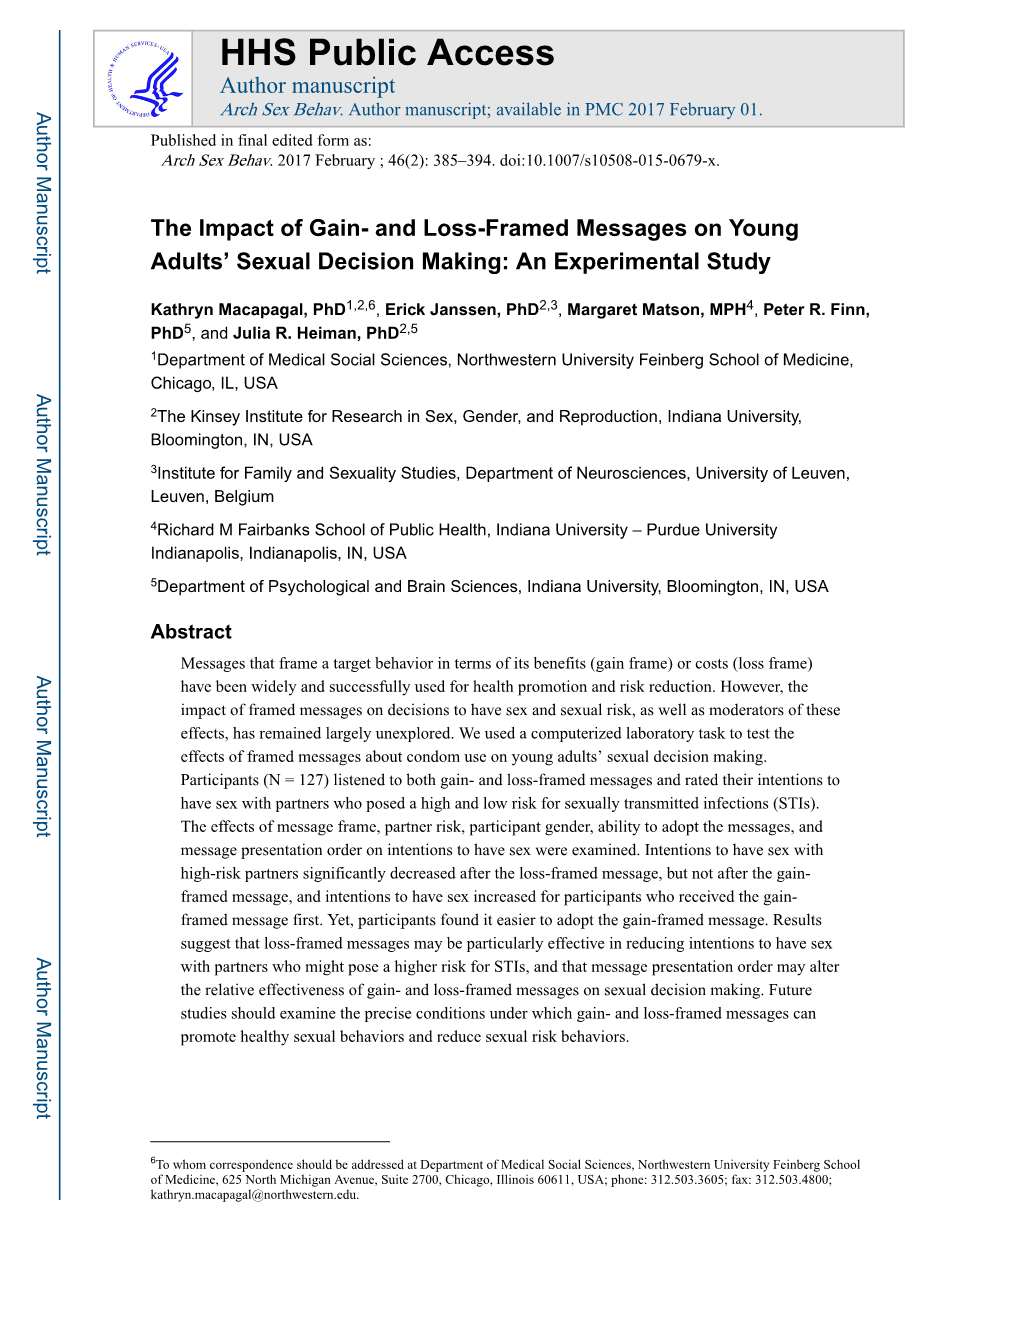 The Impact of Gain- and Loss-Framed Messages on Young Adults' Sexual